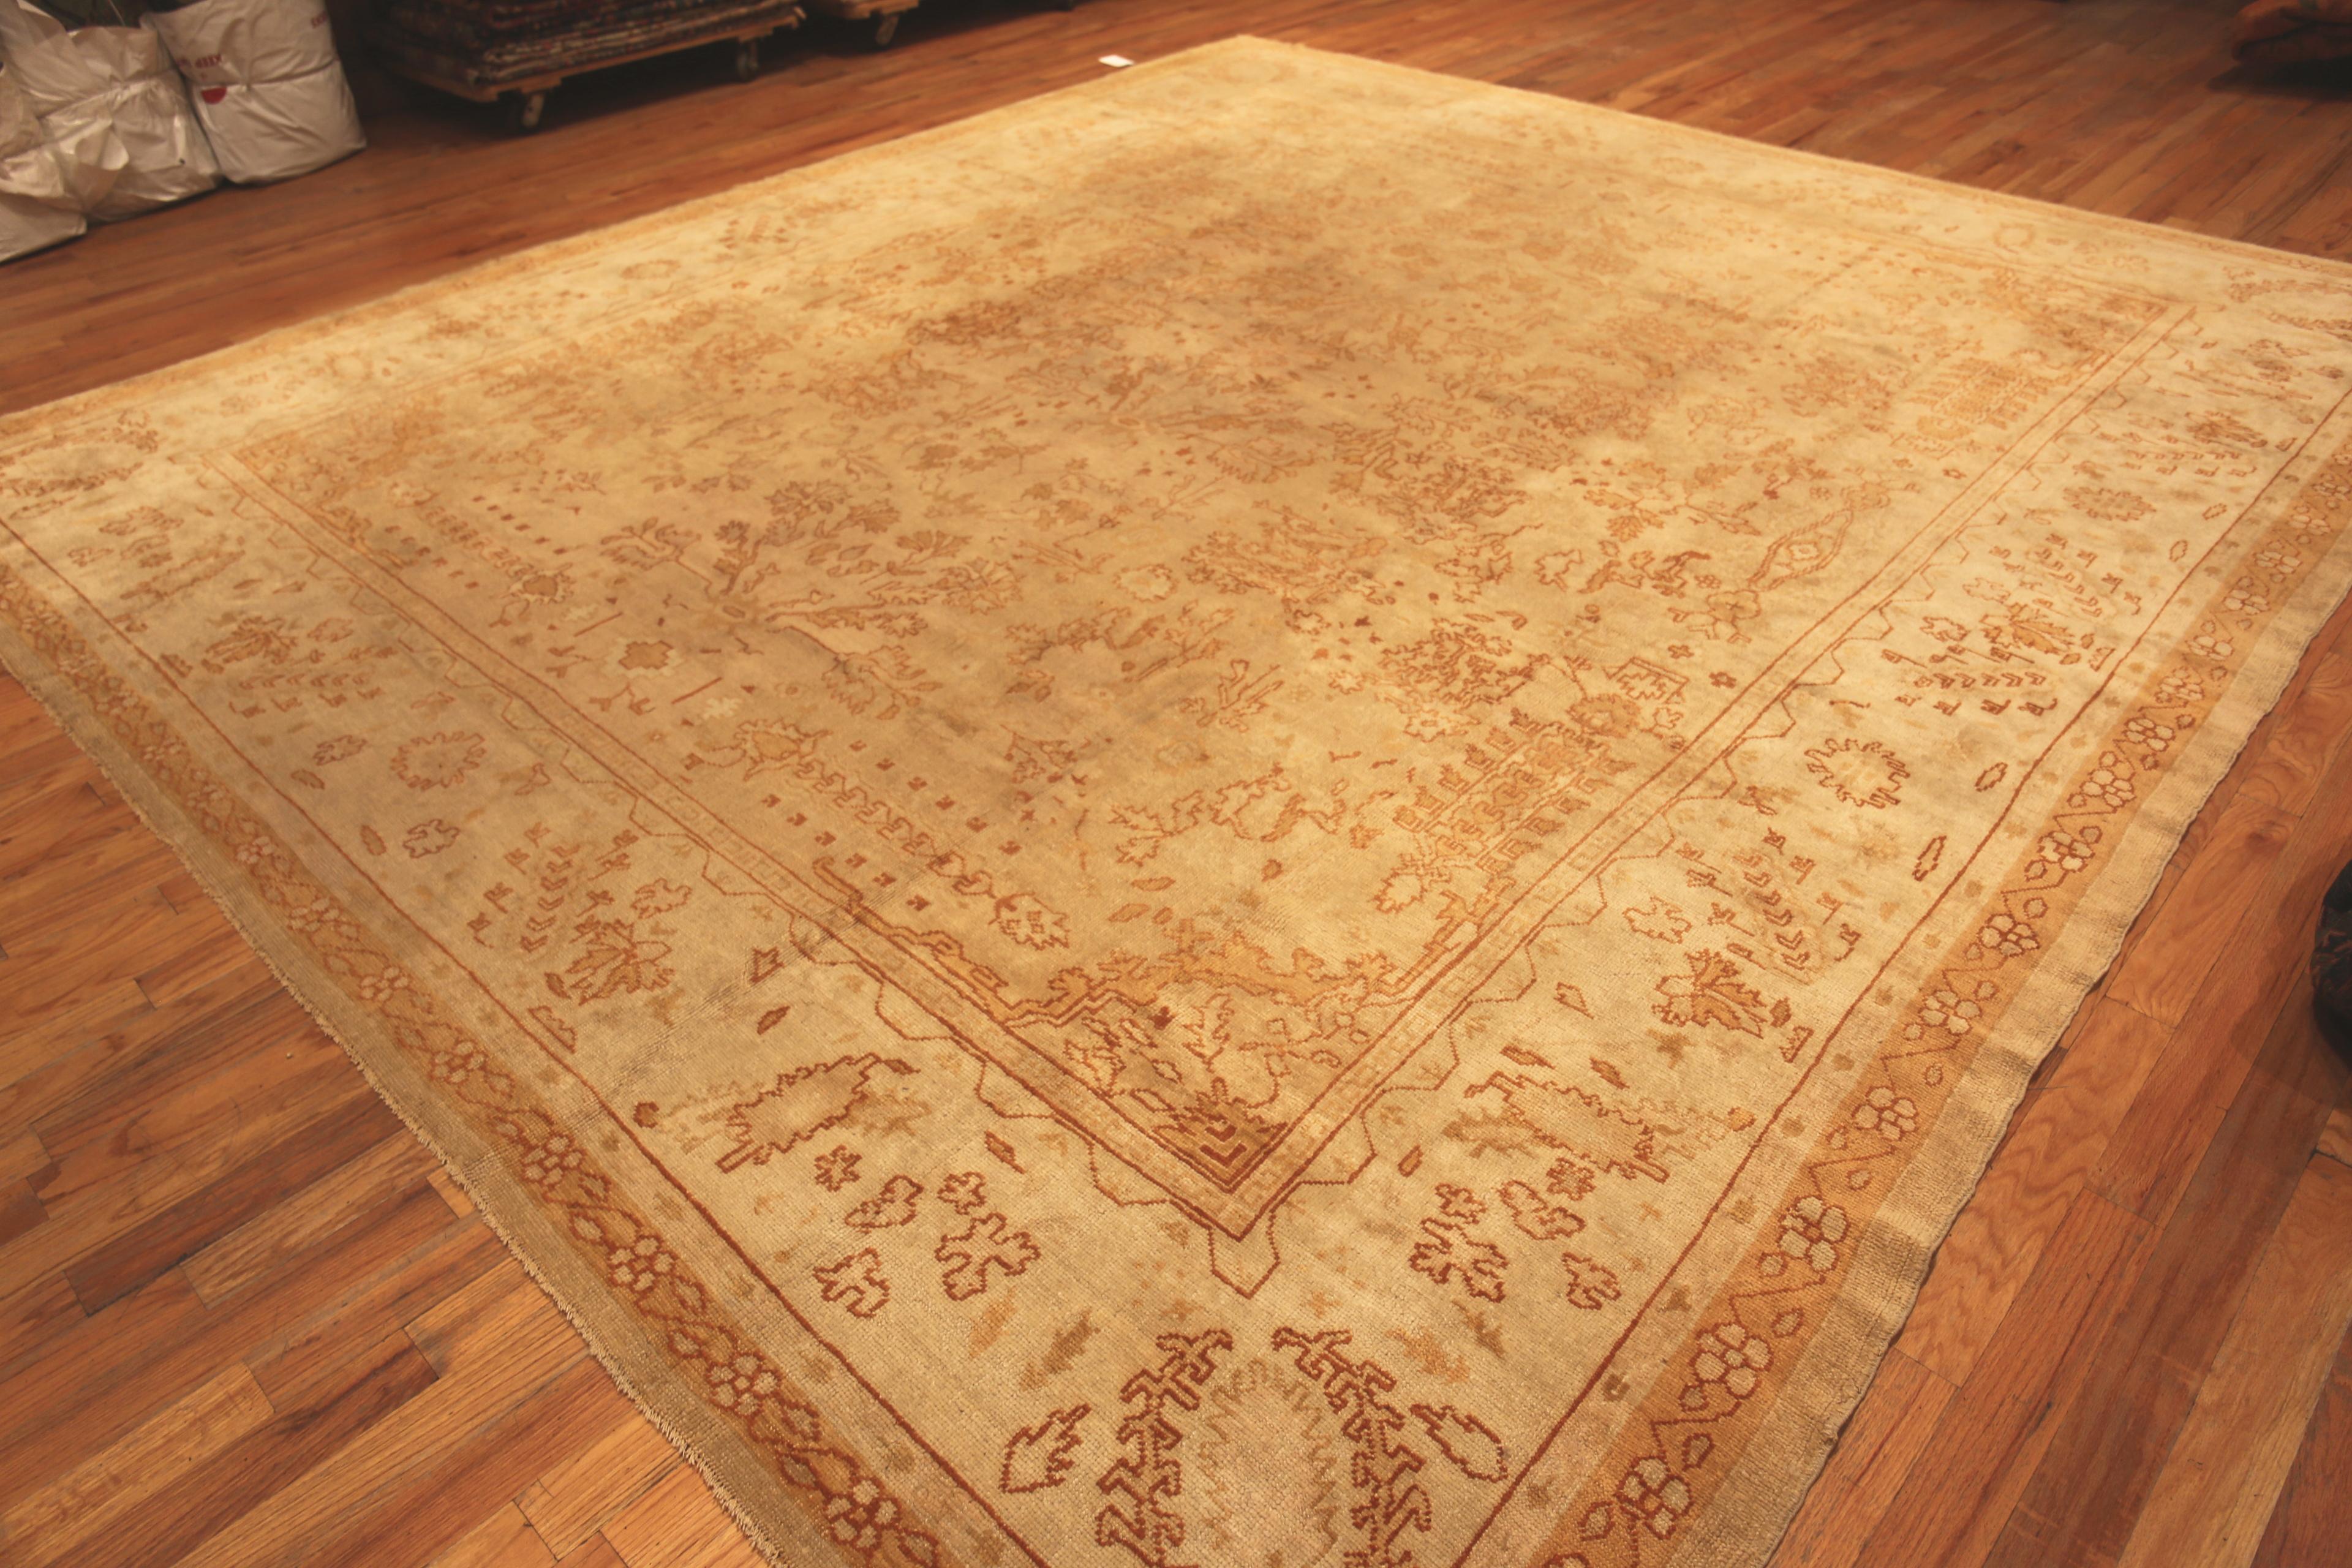 Antique Turkish Oushak Area Rug, Country of origin: Turkey, Circa date: 1900. Size: 12 ft 10 in x 14 ft 4 in (3.91 m x 4.37 m)
  